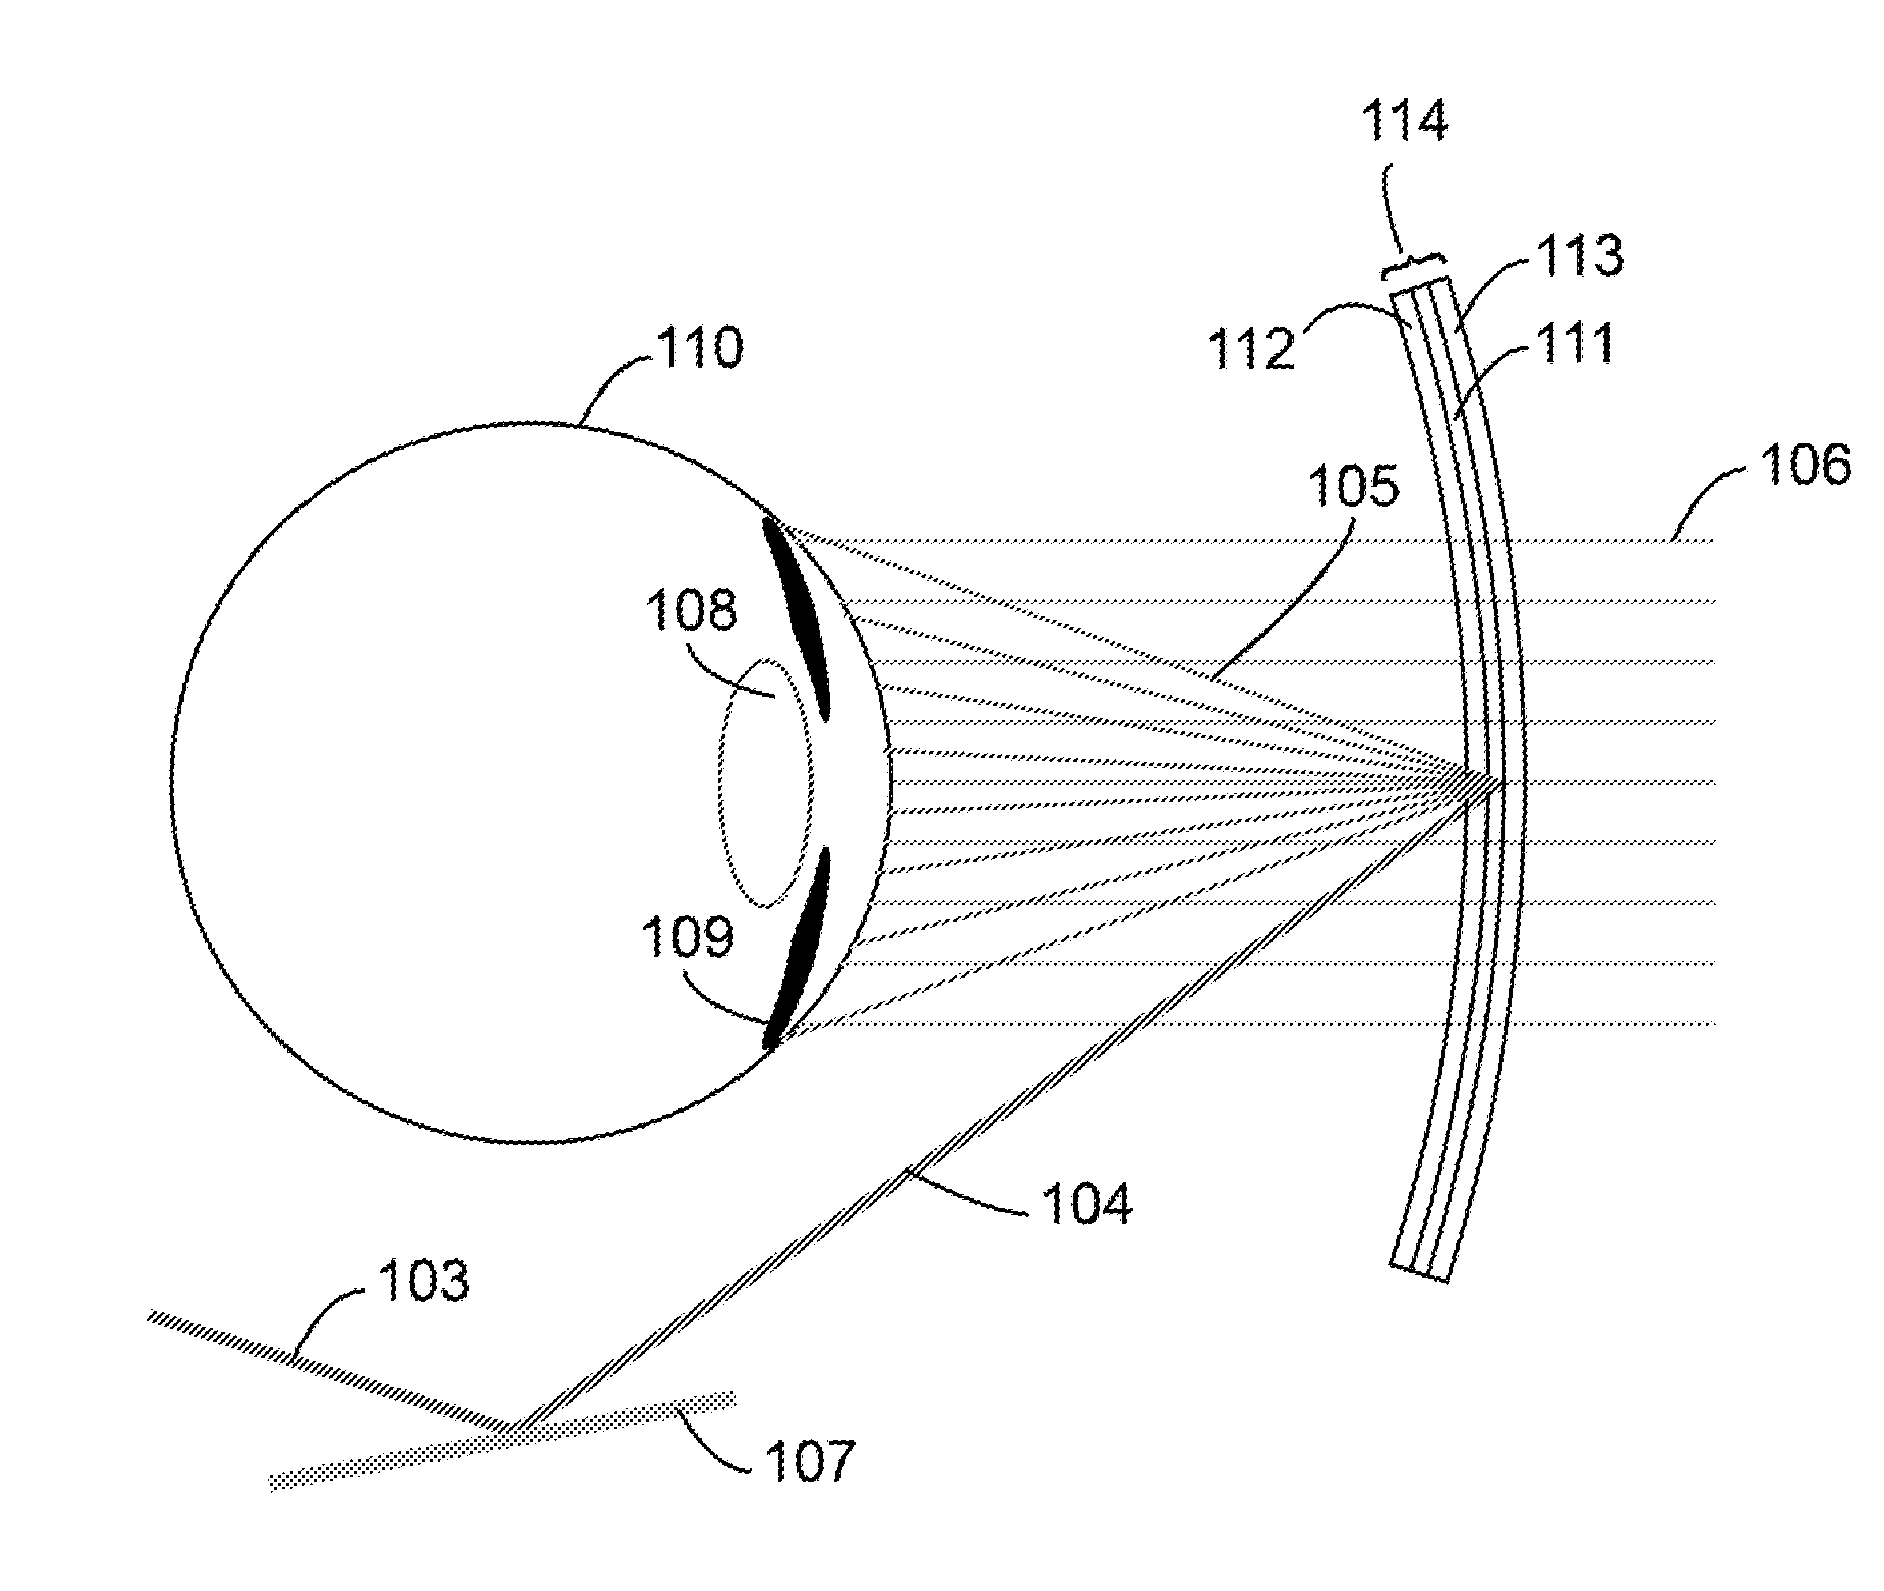 Transflective holographic film for head worn display